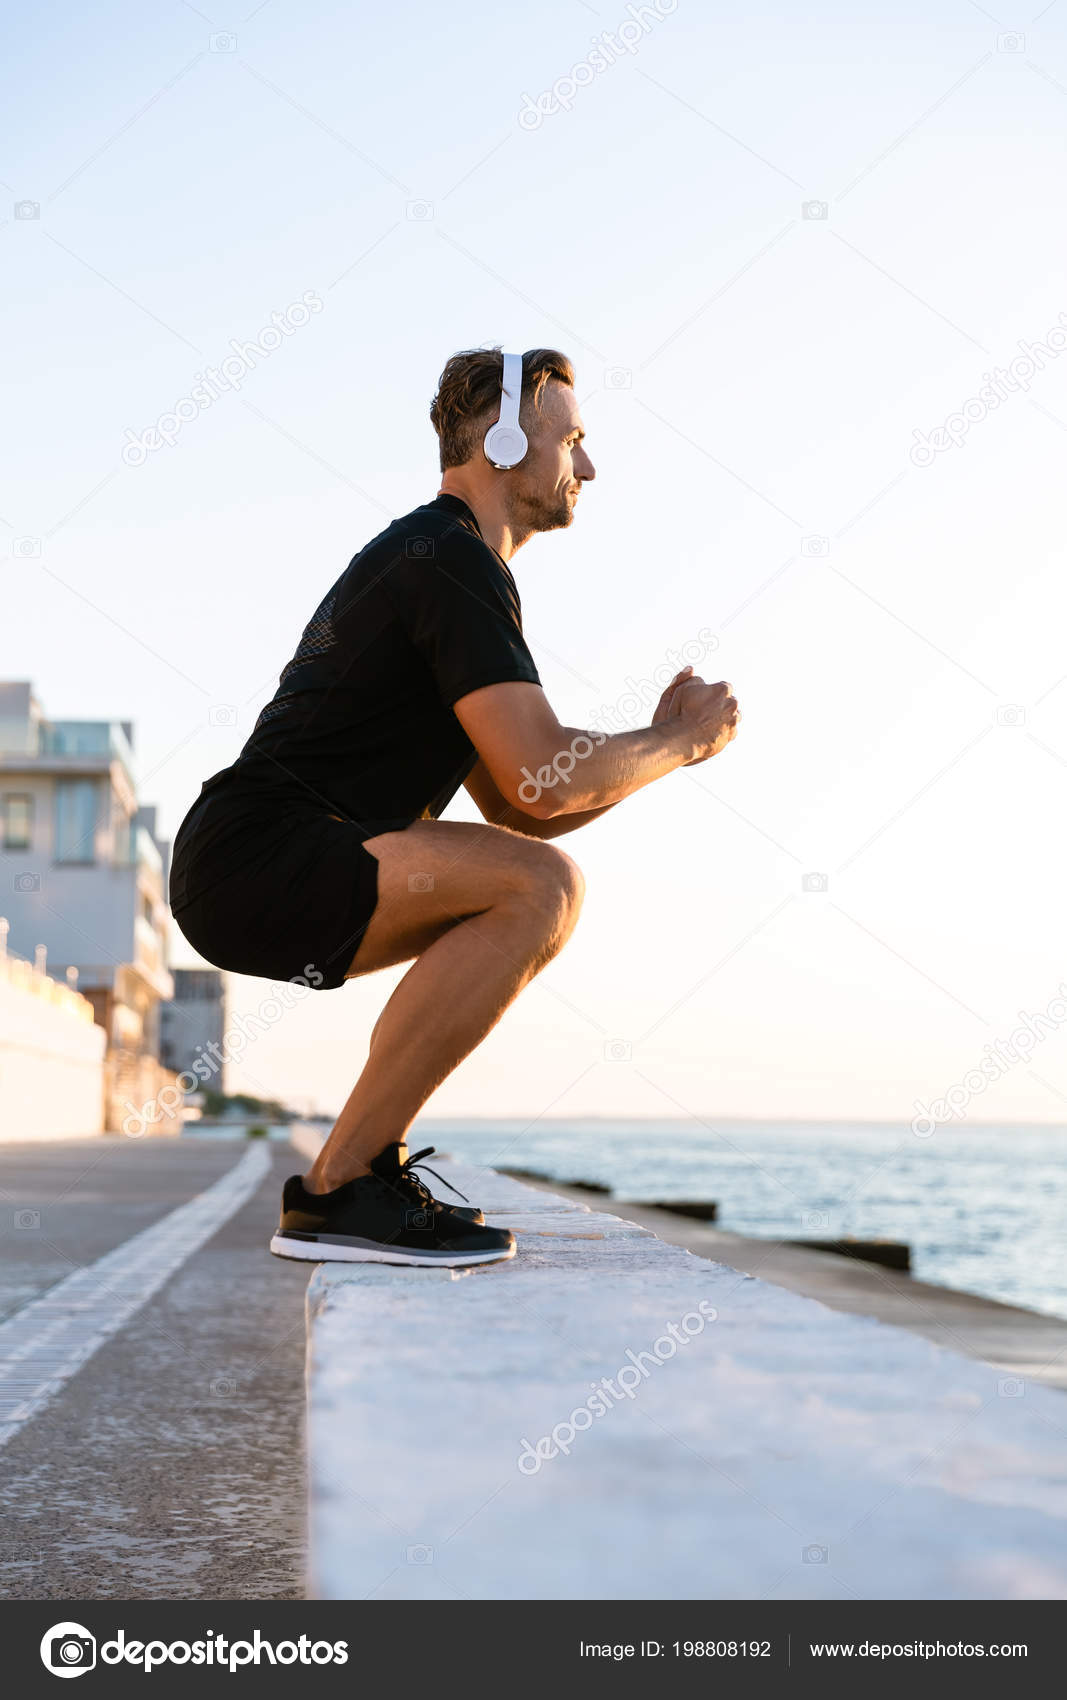 250 Jump squats Stock Photos, Images | Download Jump squats Pictures on  Depositphotos®